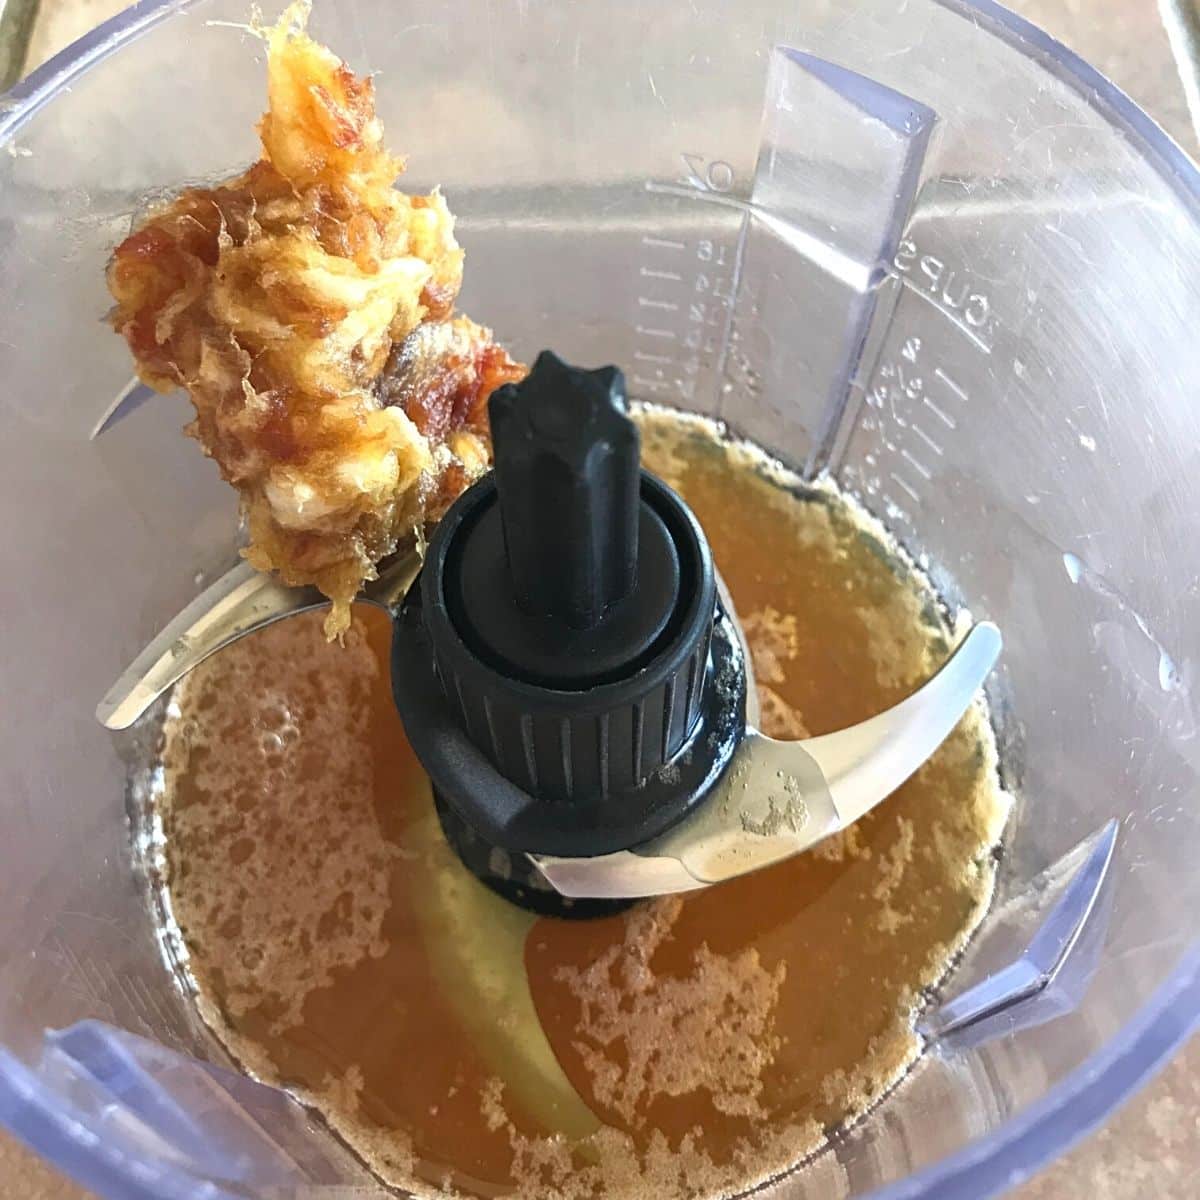 Step3 of making caramel: processing the hot syrup with date paste in a small food processor.